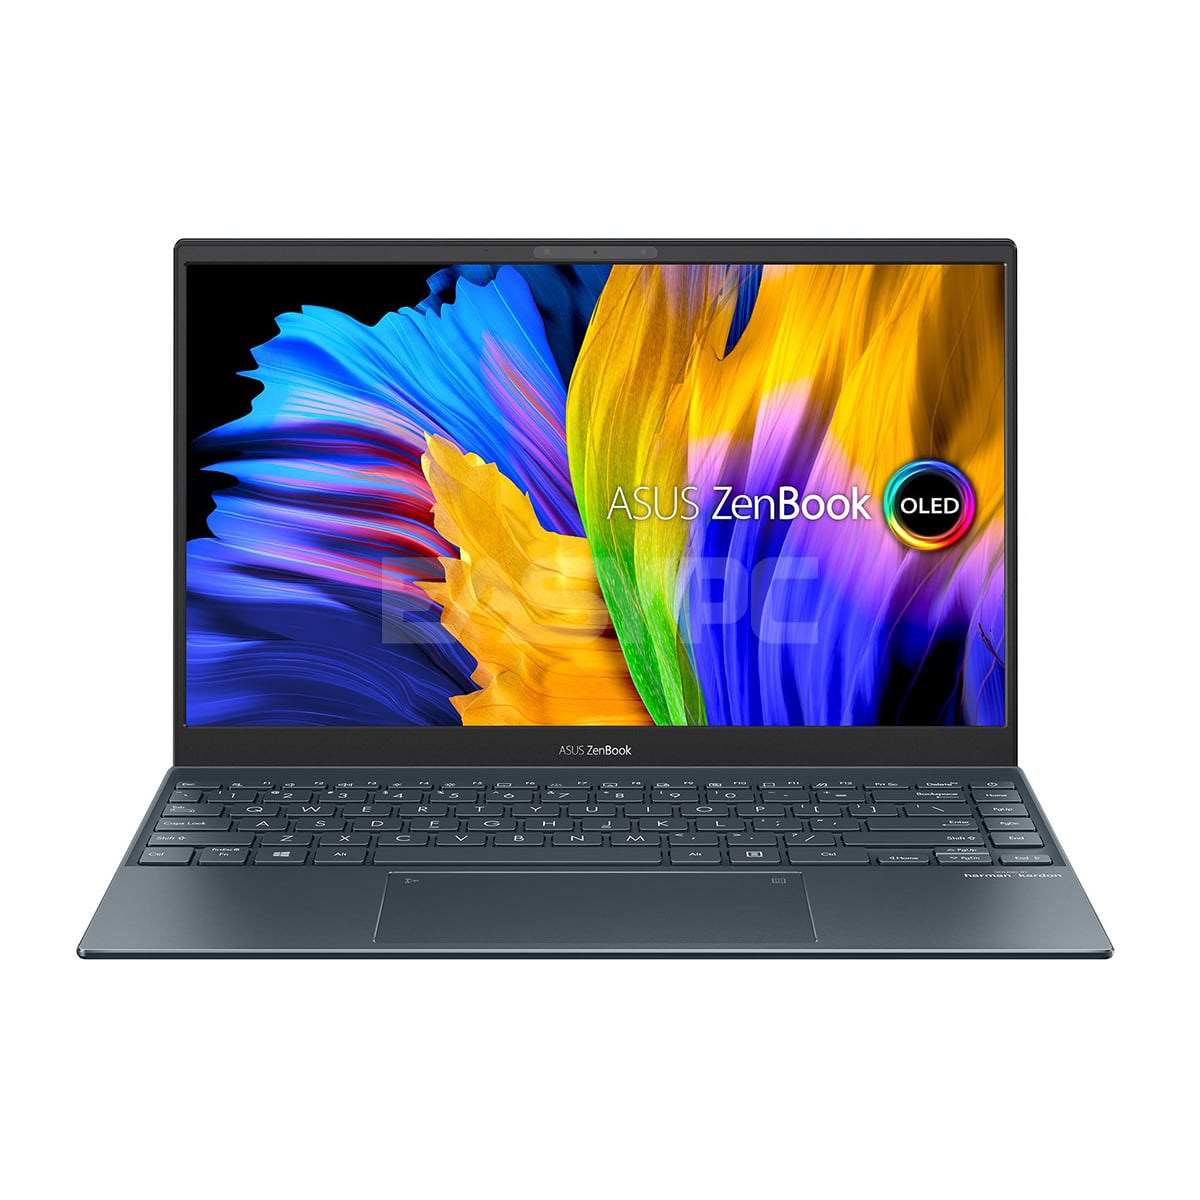 Asus ZenBook 13 OLED Laptop i5-1135G7/13.3in FHD OLED/8gb/512 SSD/Intel  IRIS XE/Backlit KB/Win10/Office Home/Gray UX325EA-KG230TS 1ION Lazada PH